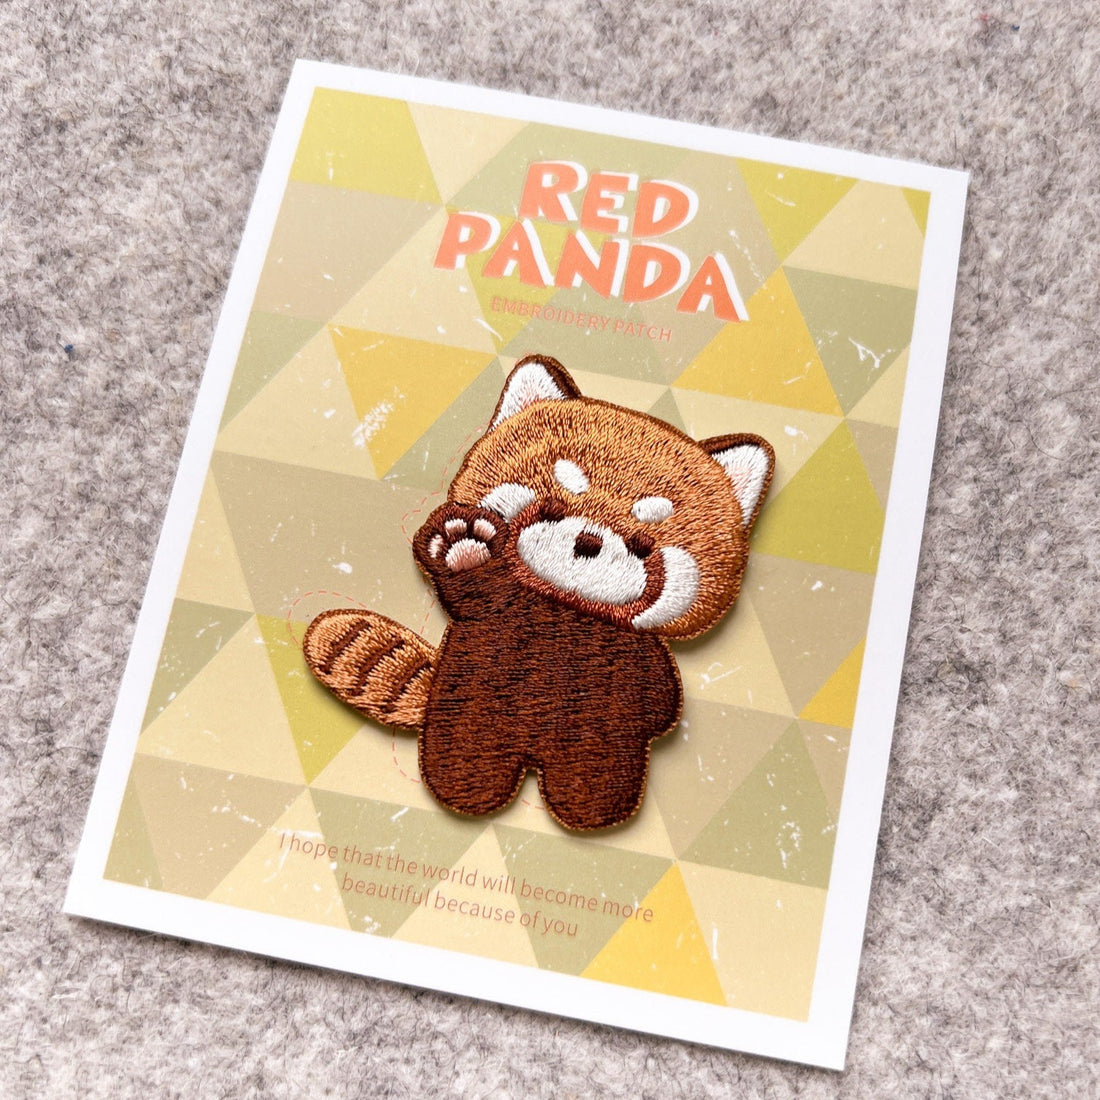 Red Panda Patch Iron-On